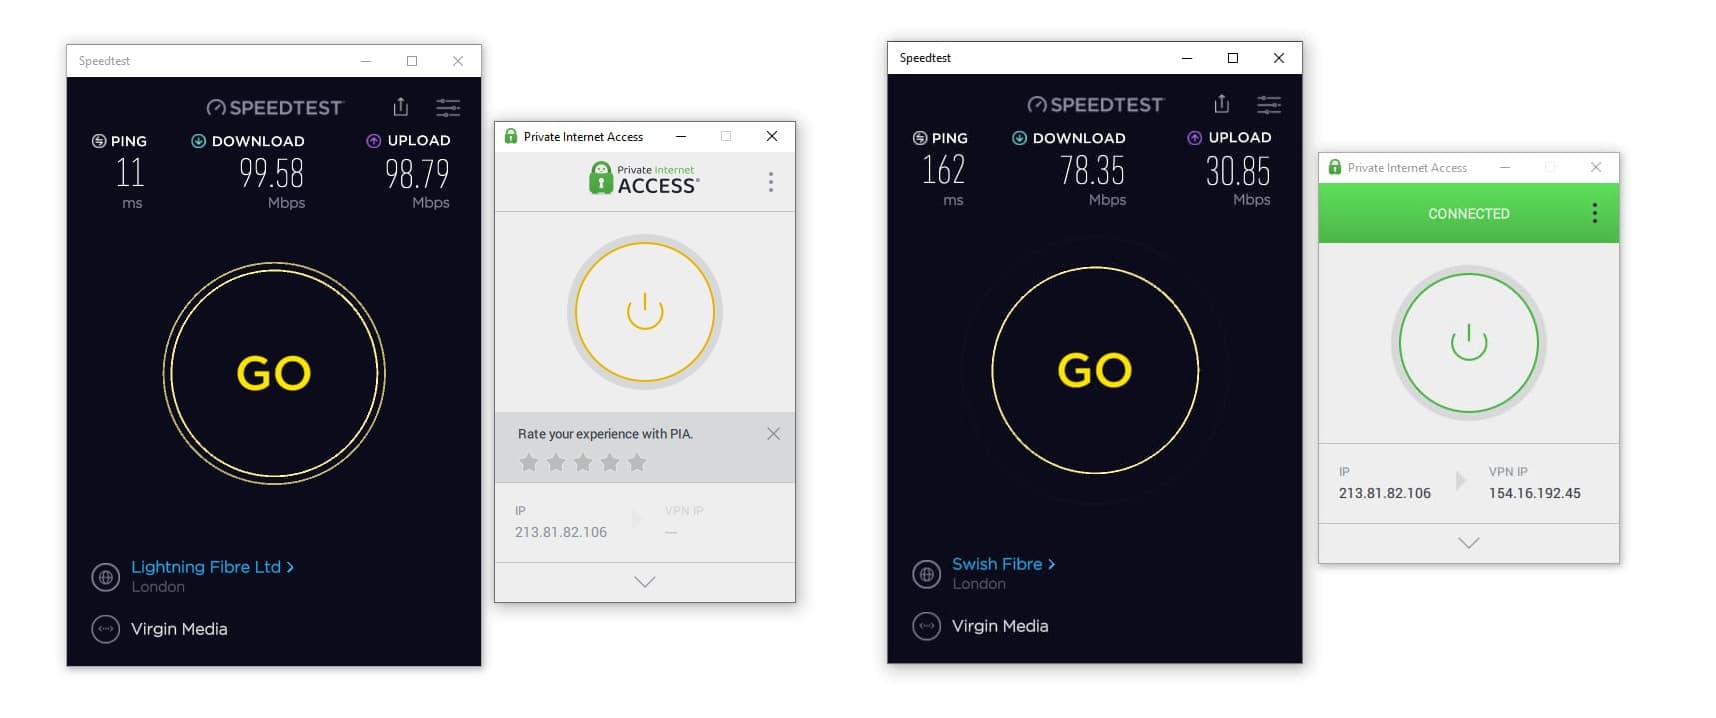 Comparison between connection speeds when using a VPN and not using a VPN